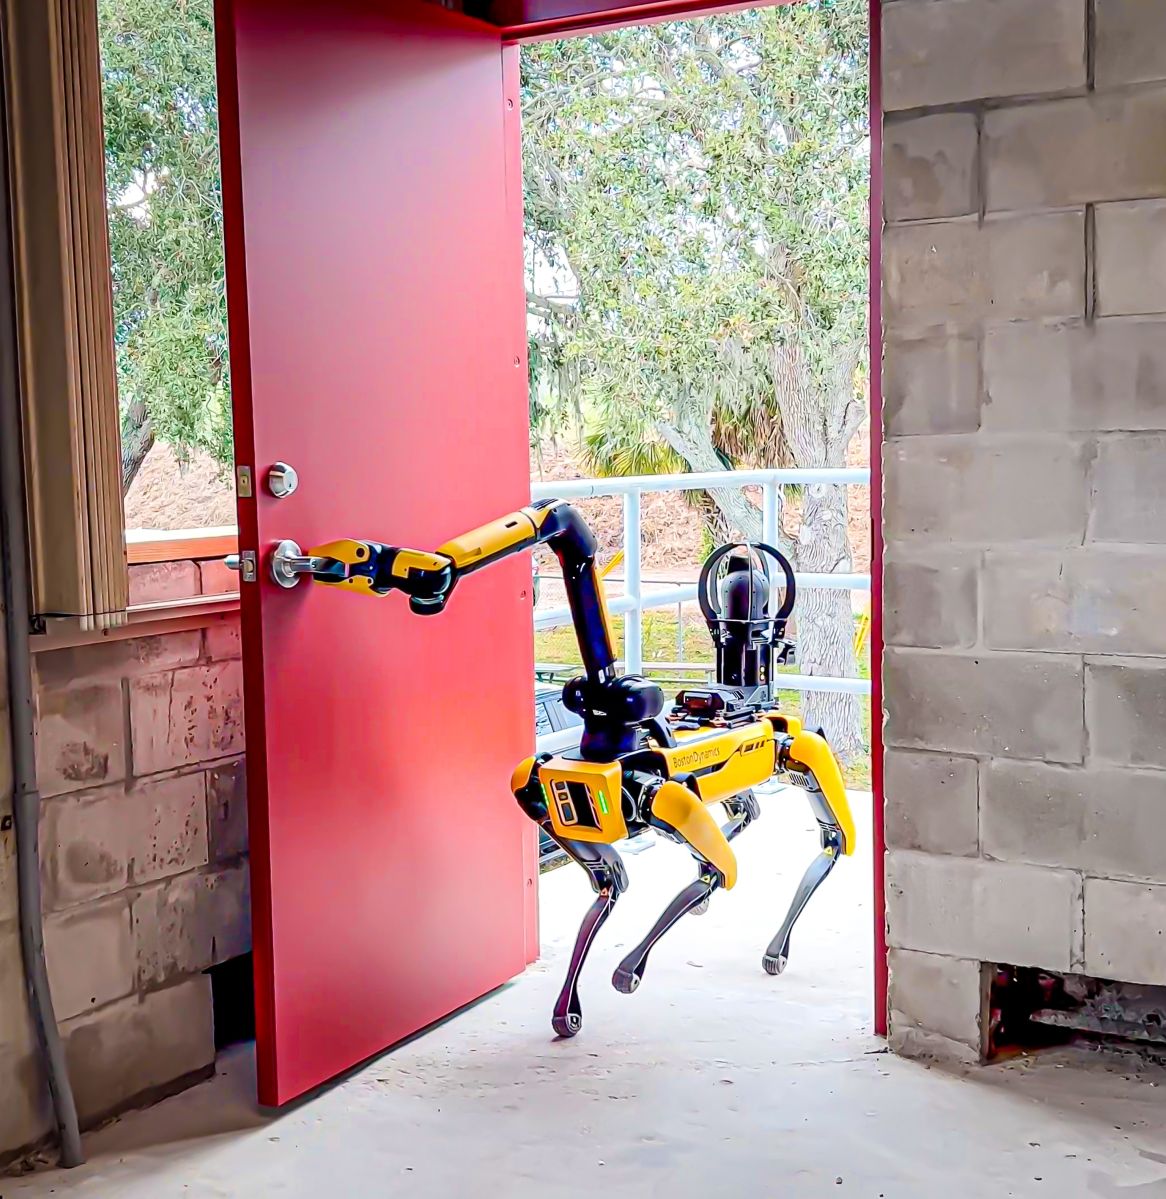 PHOTO: A robot dog becomes the new reinforcement of the Florida Police